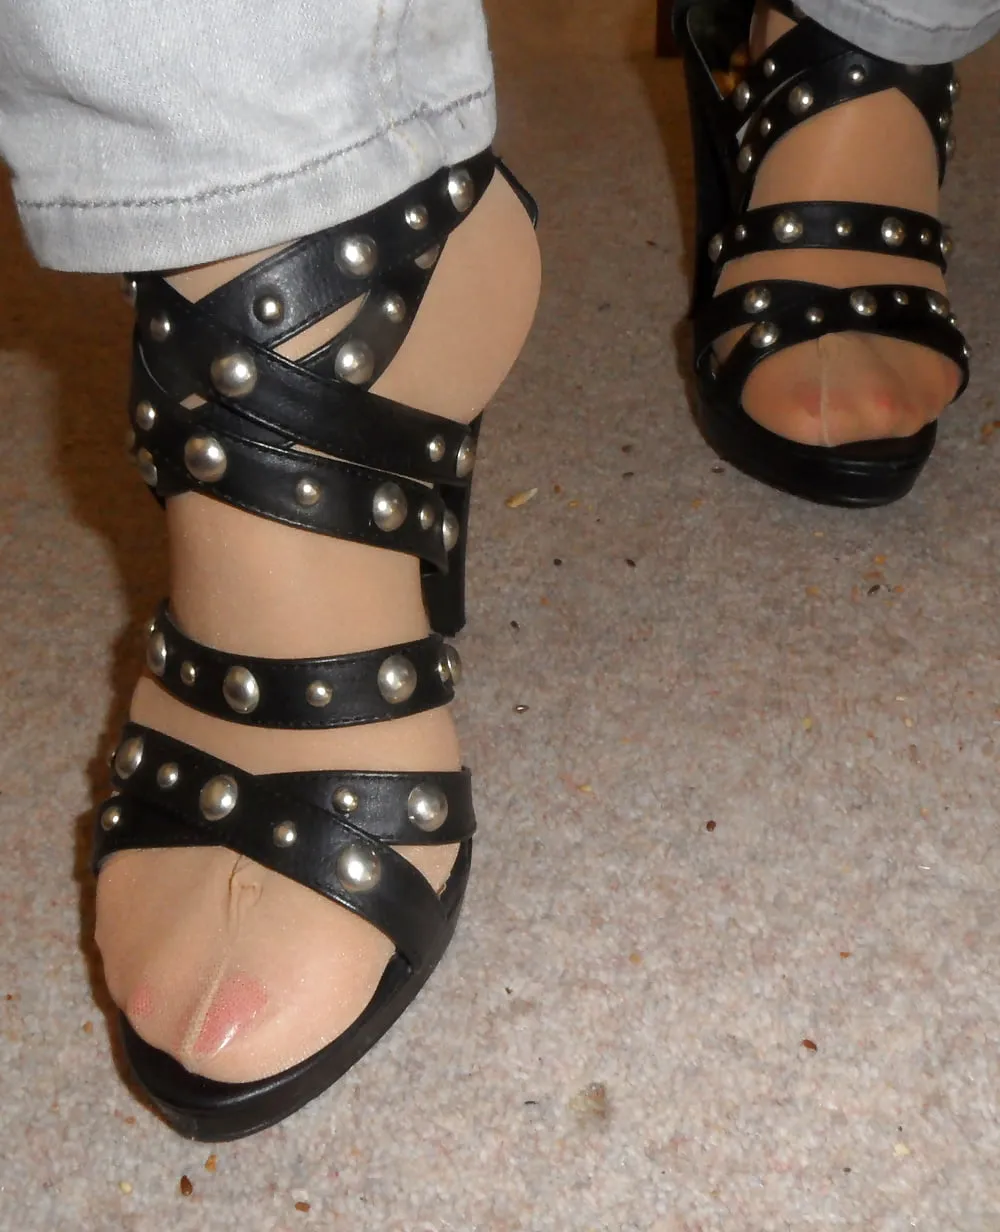 studded high heels of my wife with painted toenails